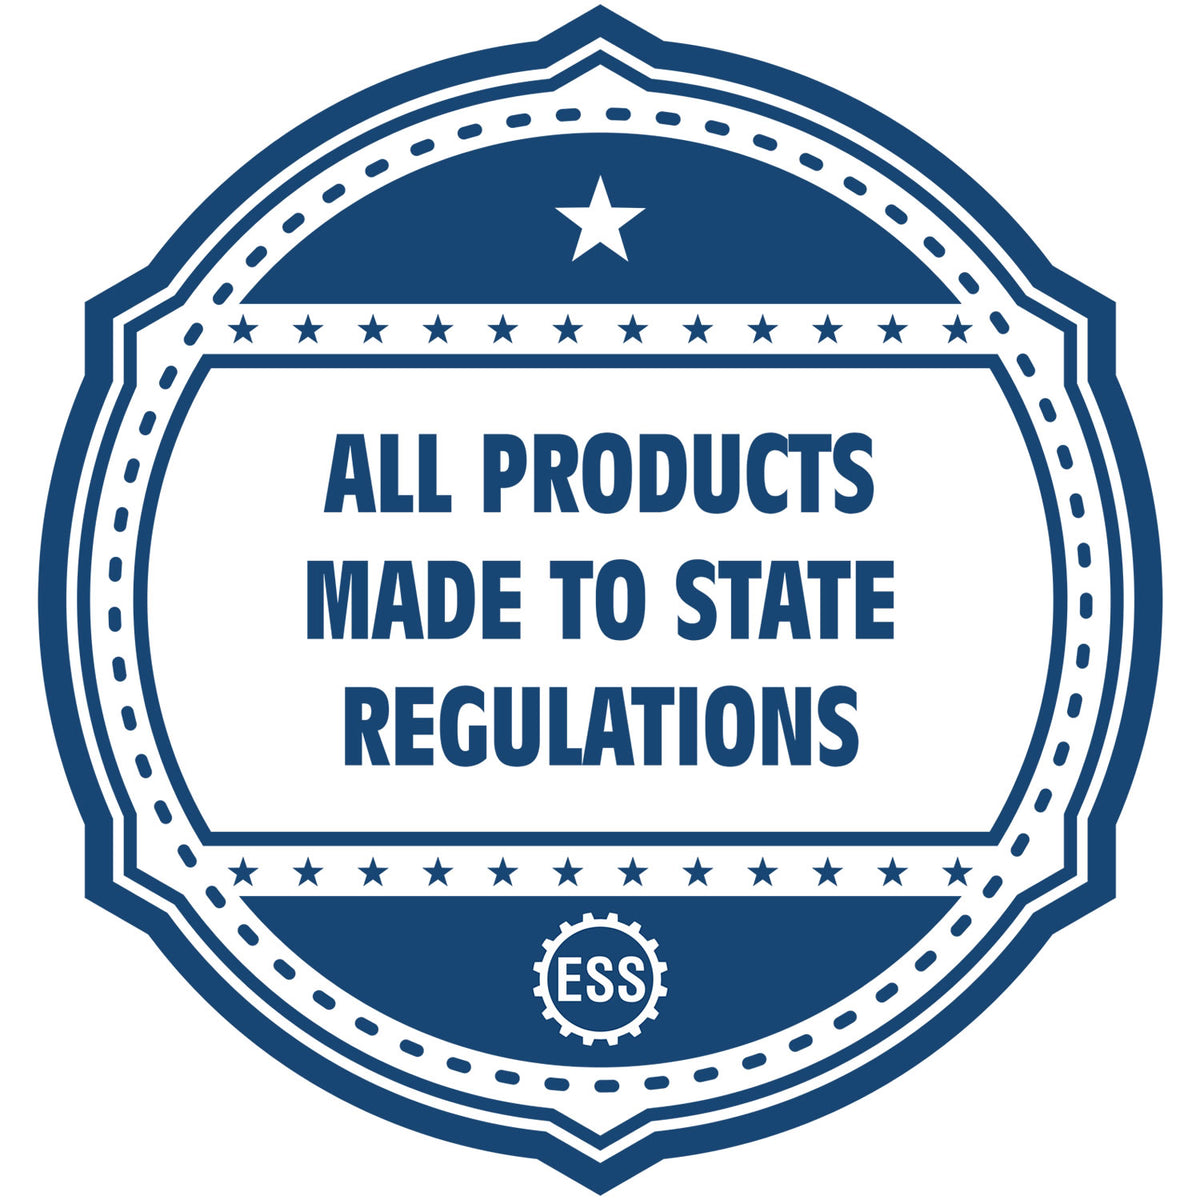 A blue icon or badge for the Gift Texas Engineer Seal showing that this product is made in compliance with state regulations.